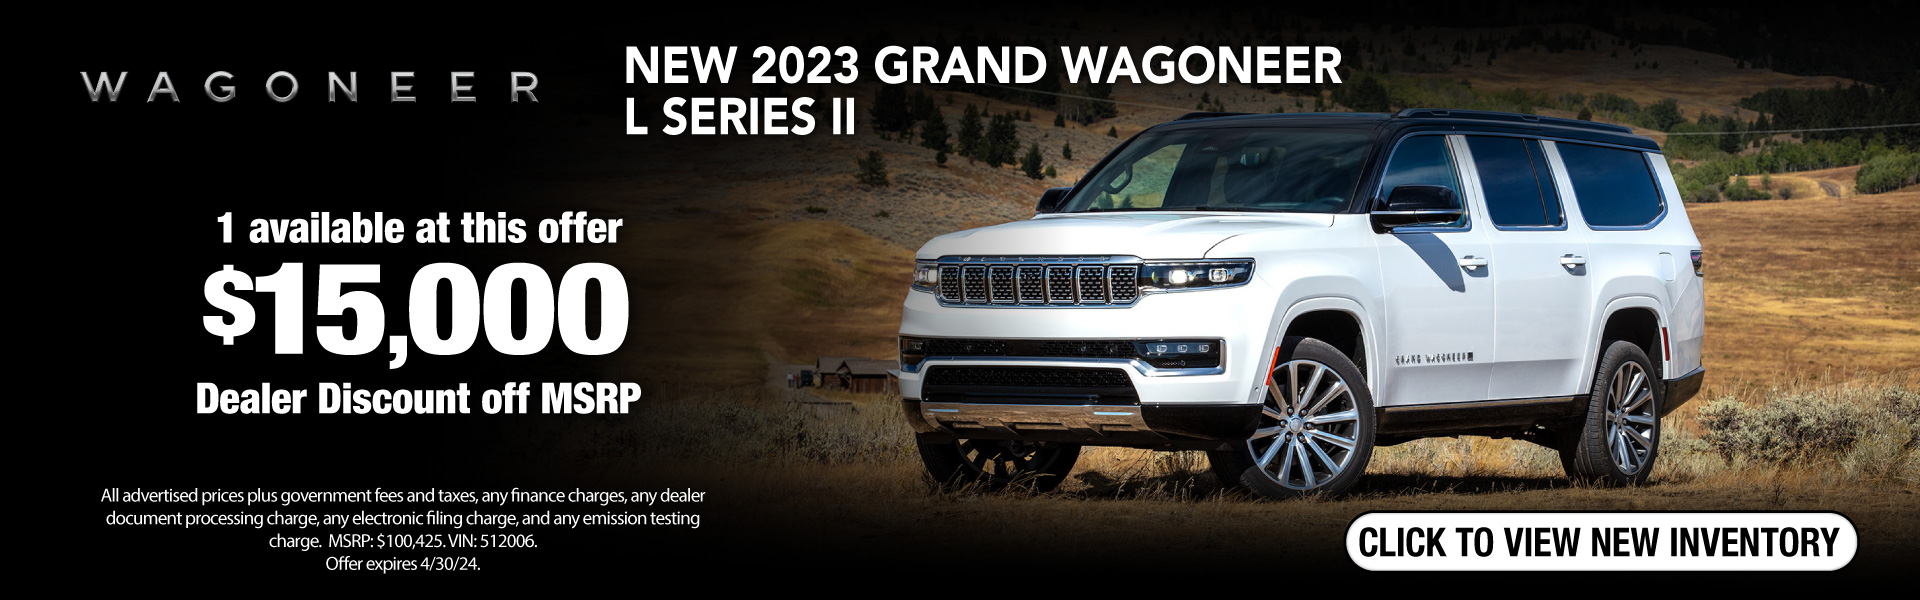 Get $15,000 Dealer Discount on a New 2023 Grand Wagoneer L Series II! Expires 4/30/24.